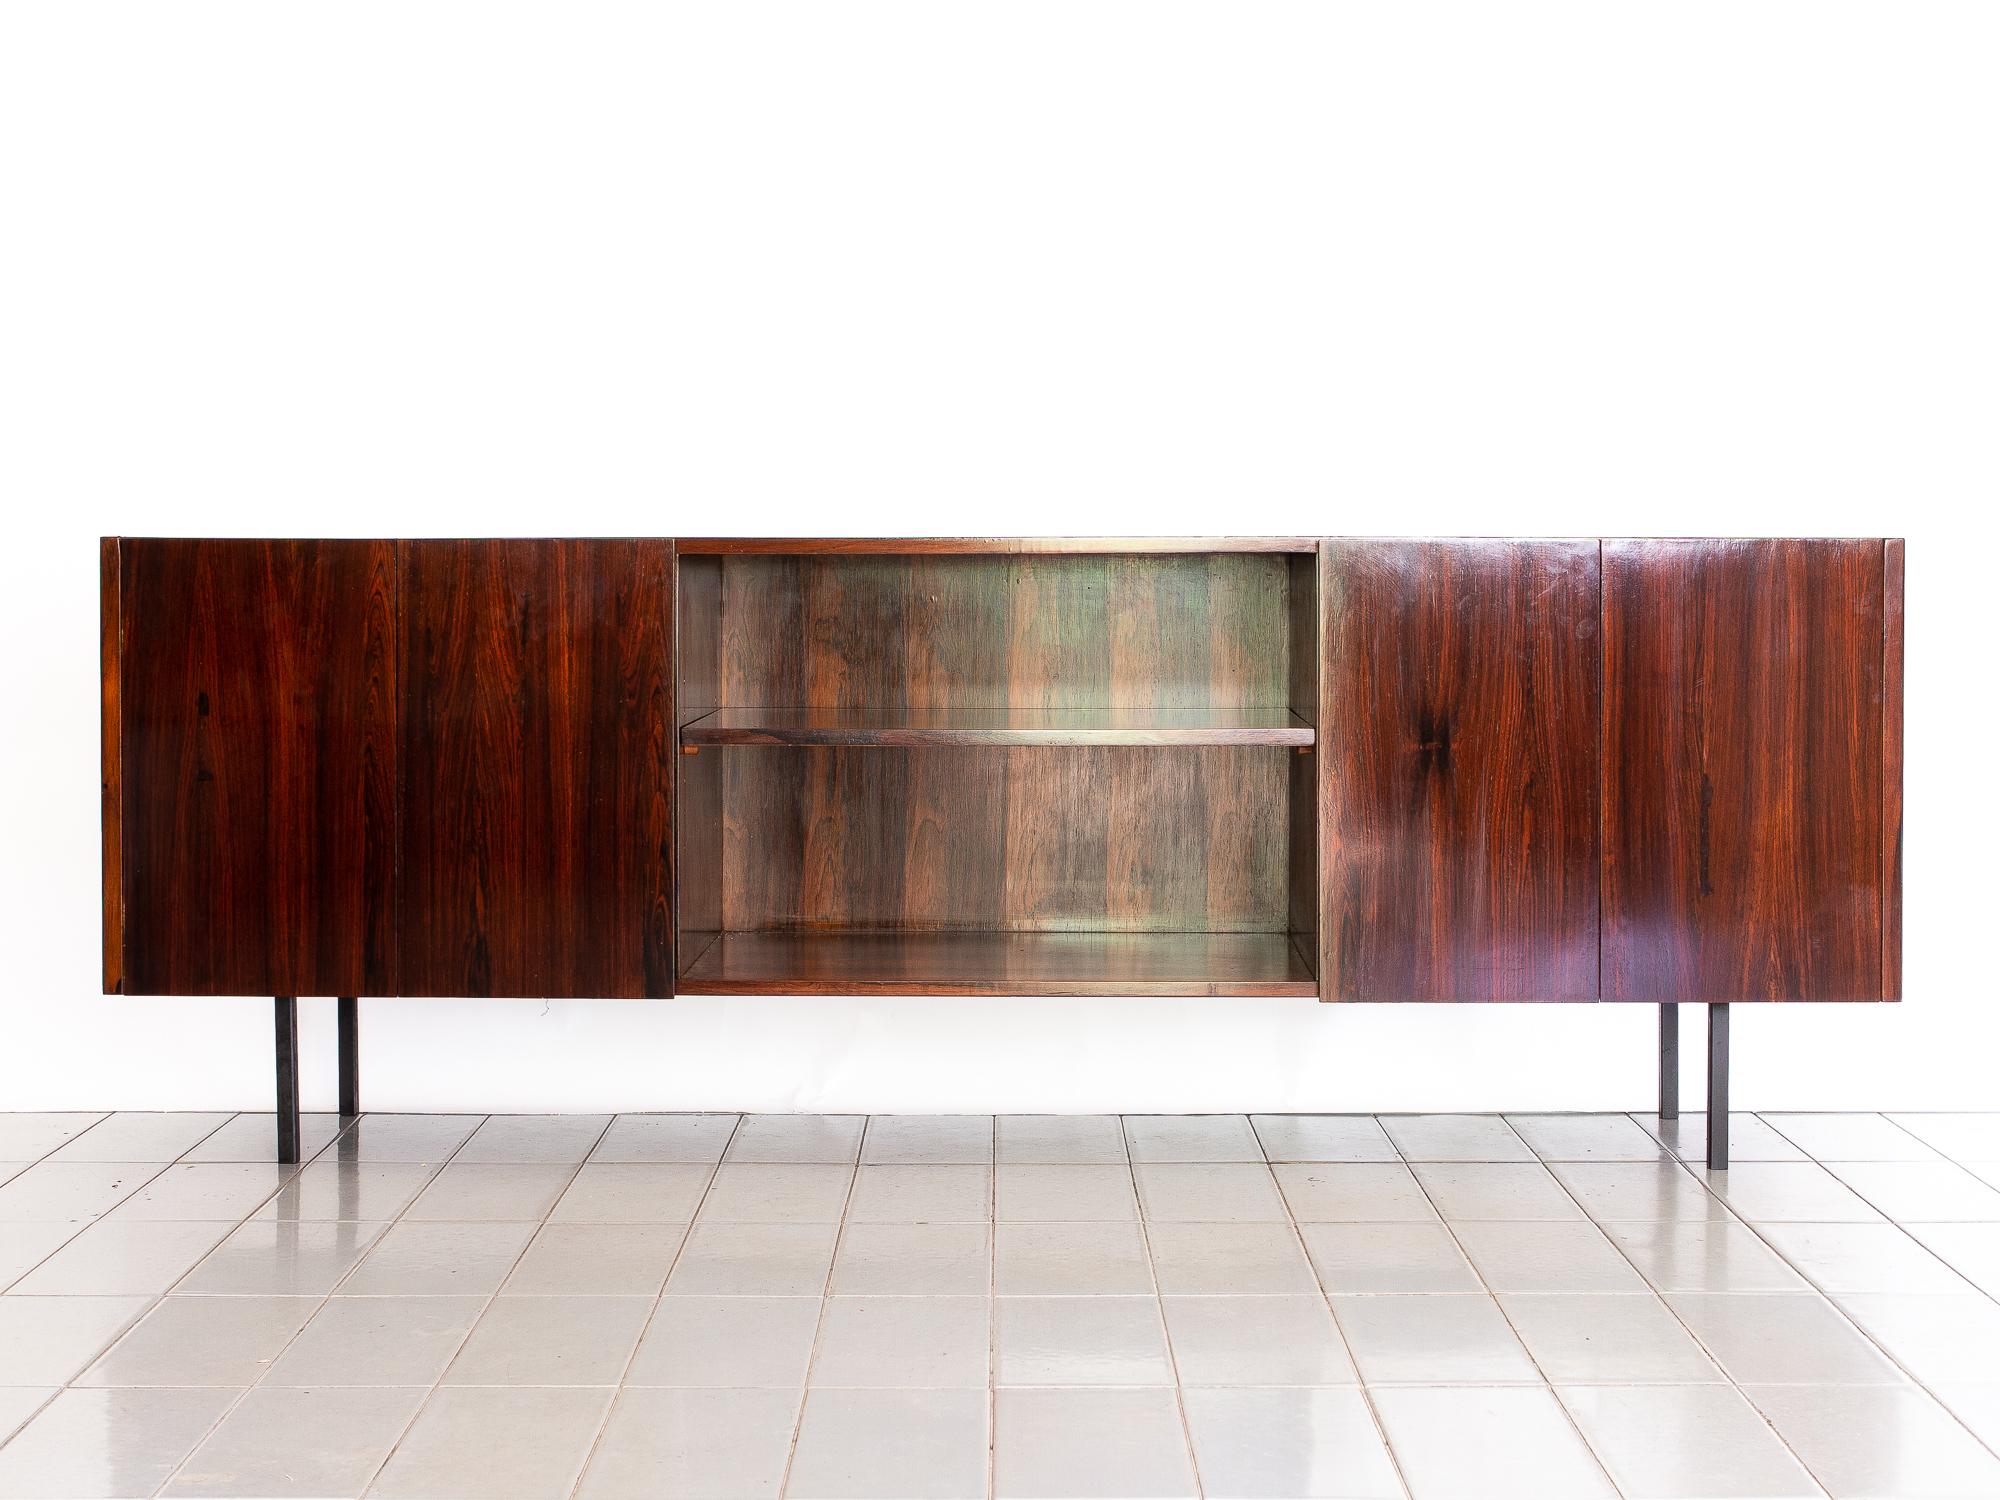 1960s Sideboard in Rosewood and Iron, Designed by Carlo Fongaro, Brazil (Moderne der Mitte des Jahrhunderts)